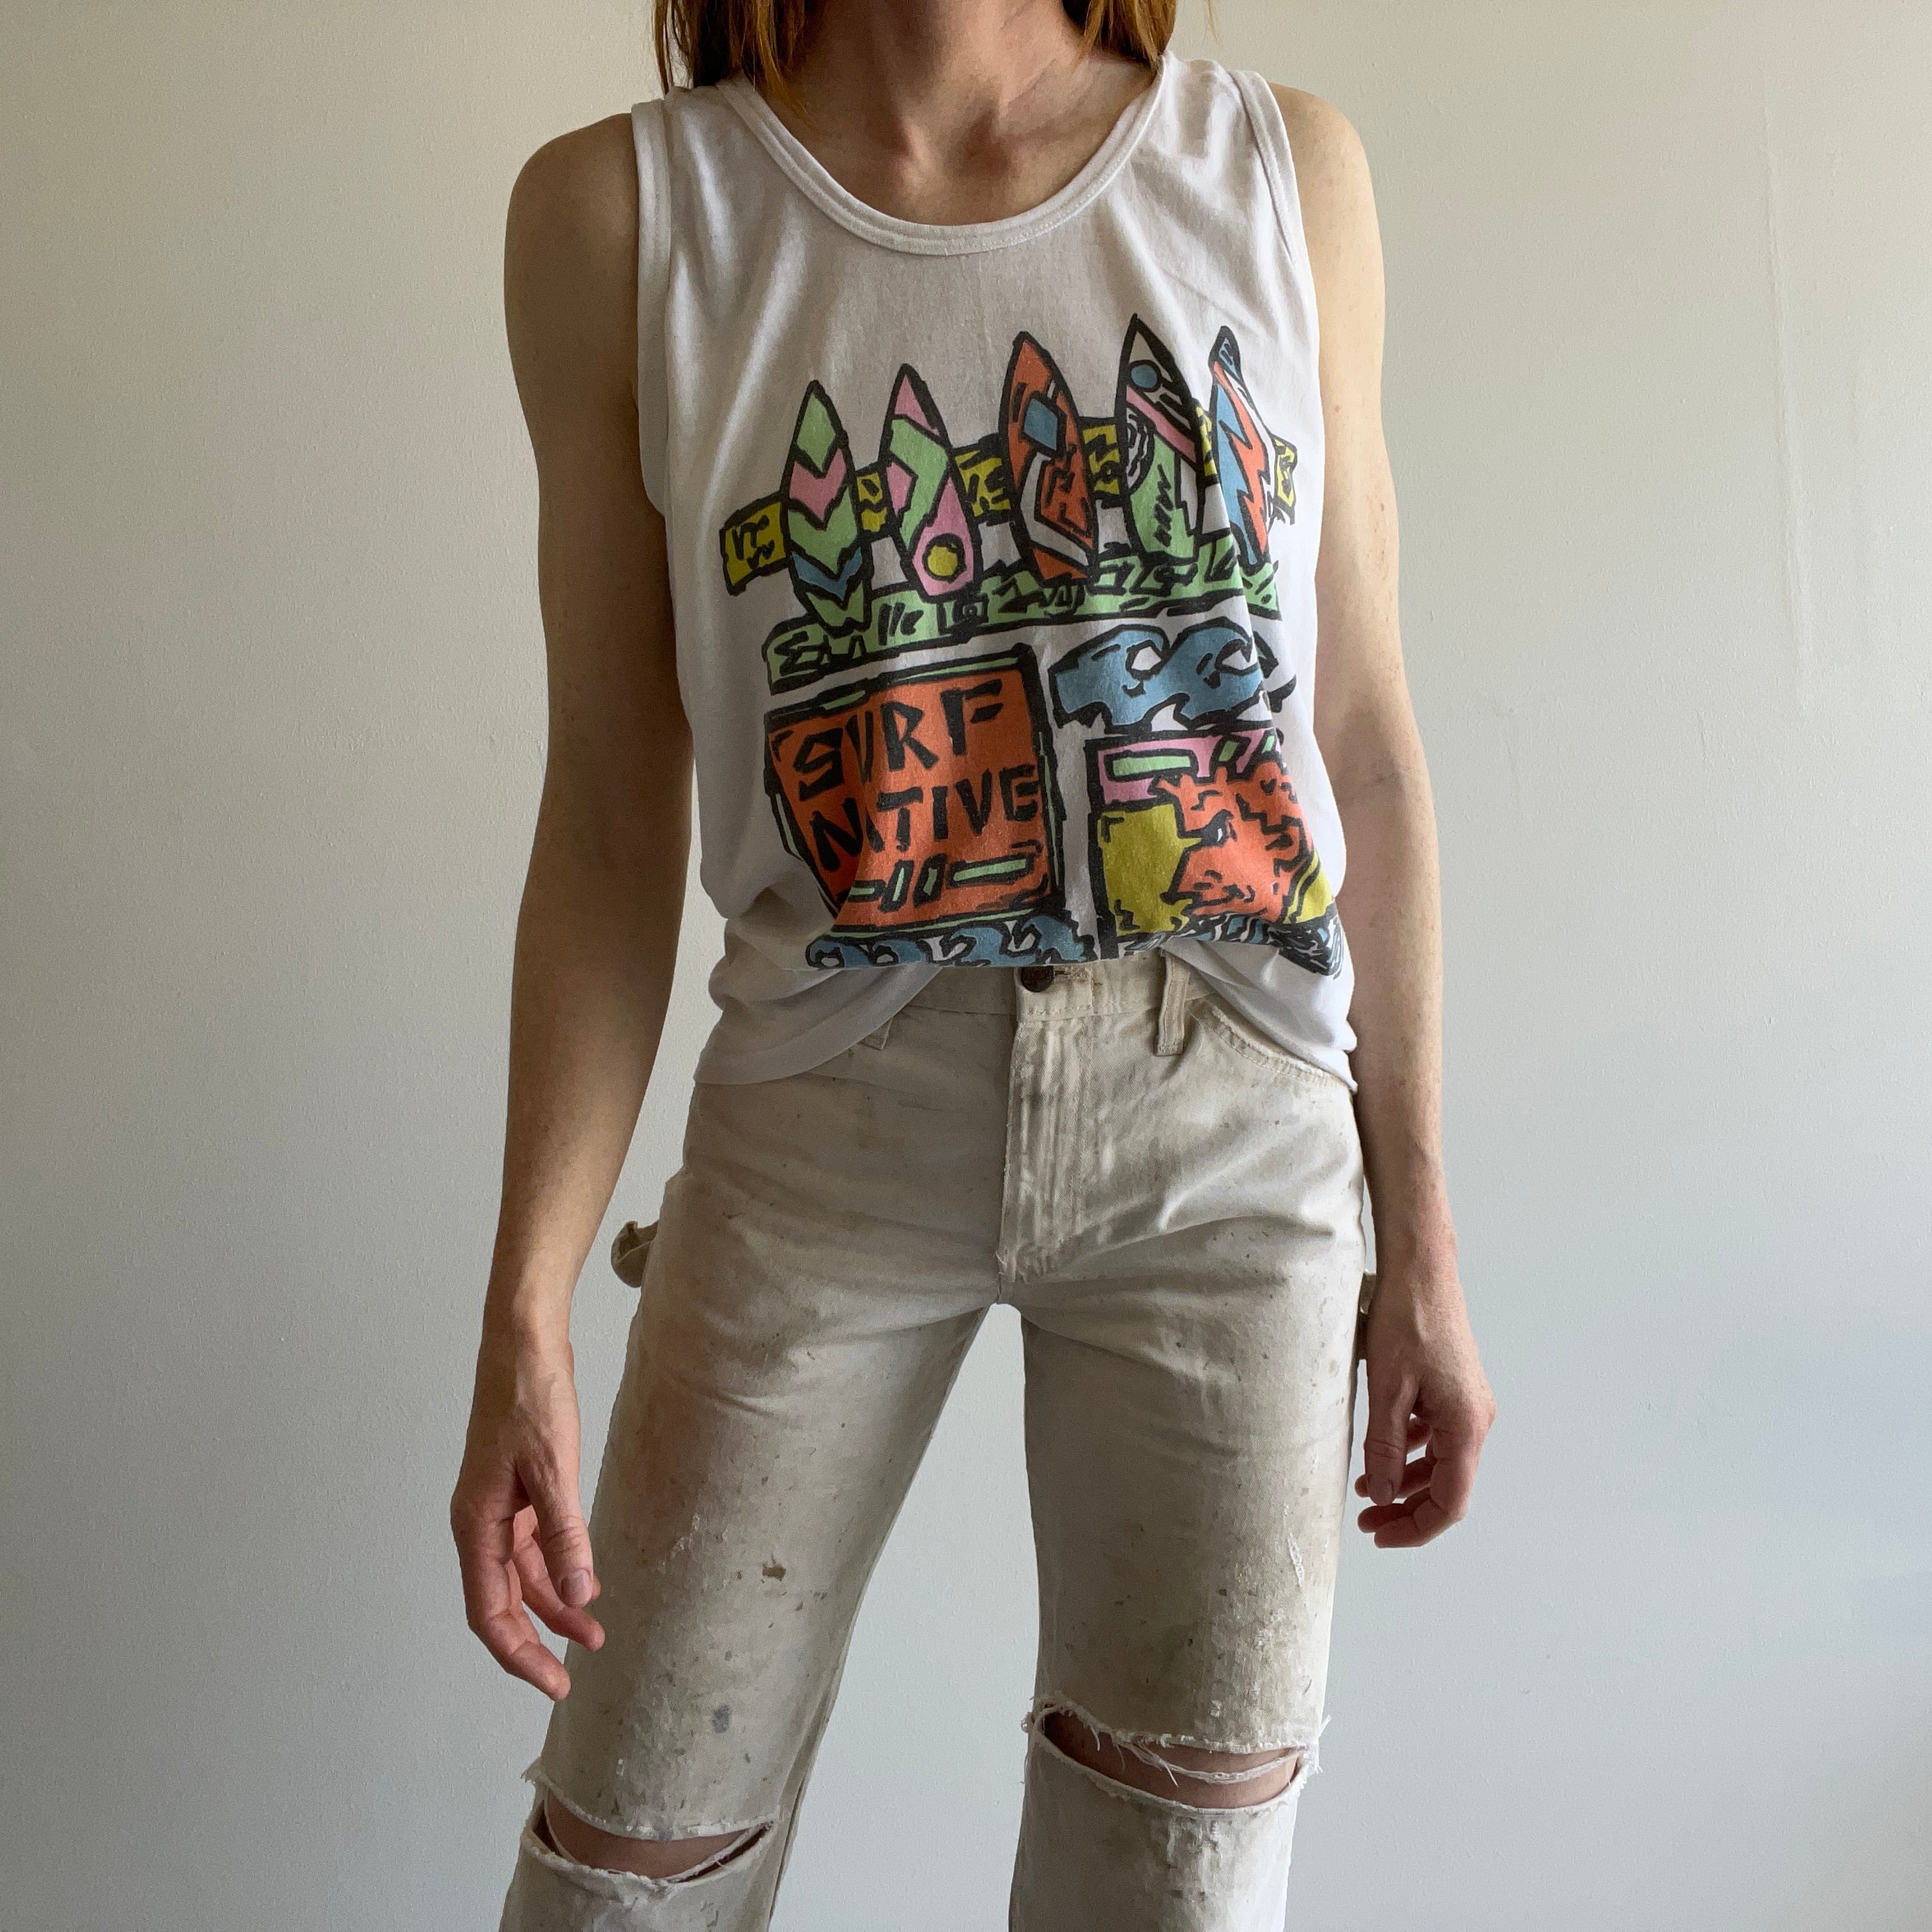 1980s Surf Native Tank Top